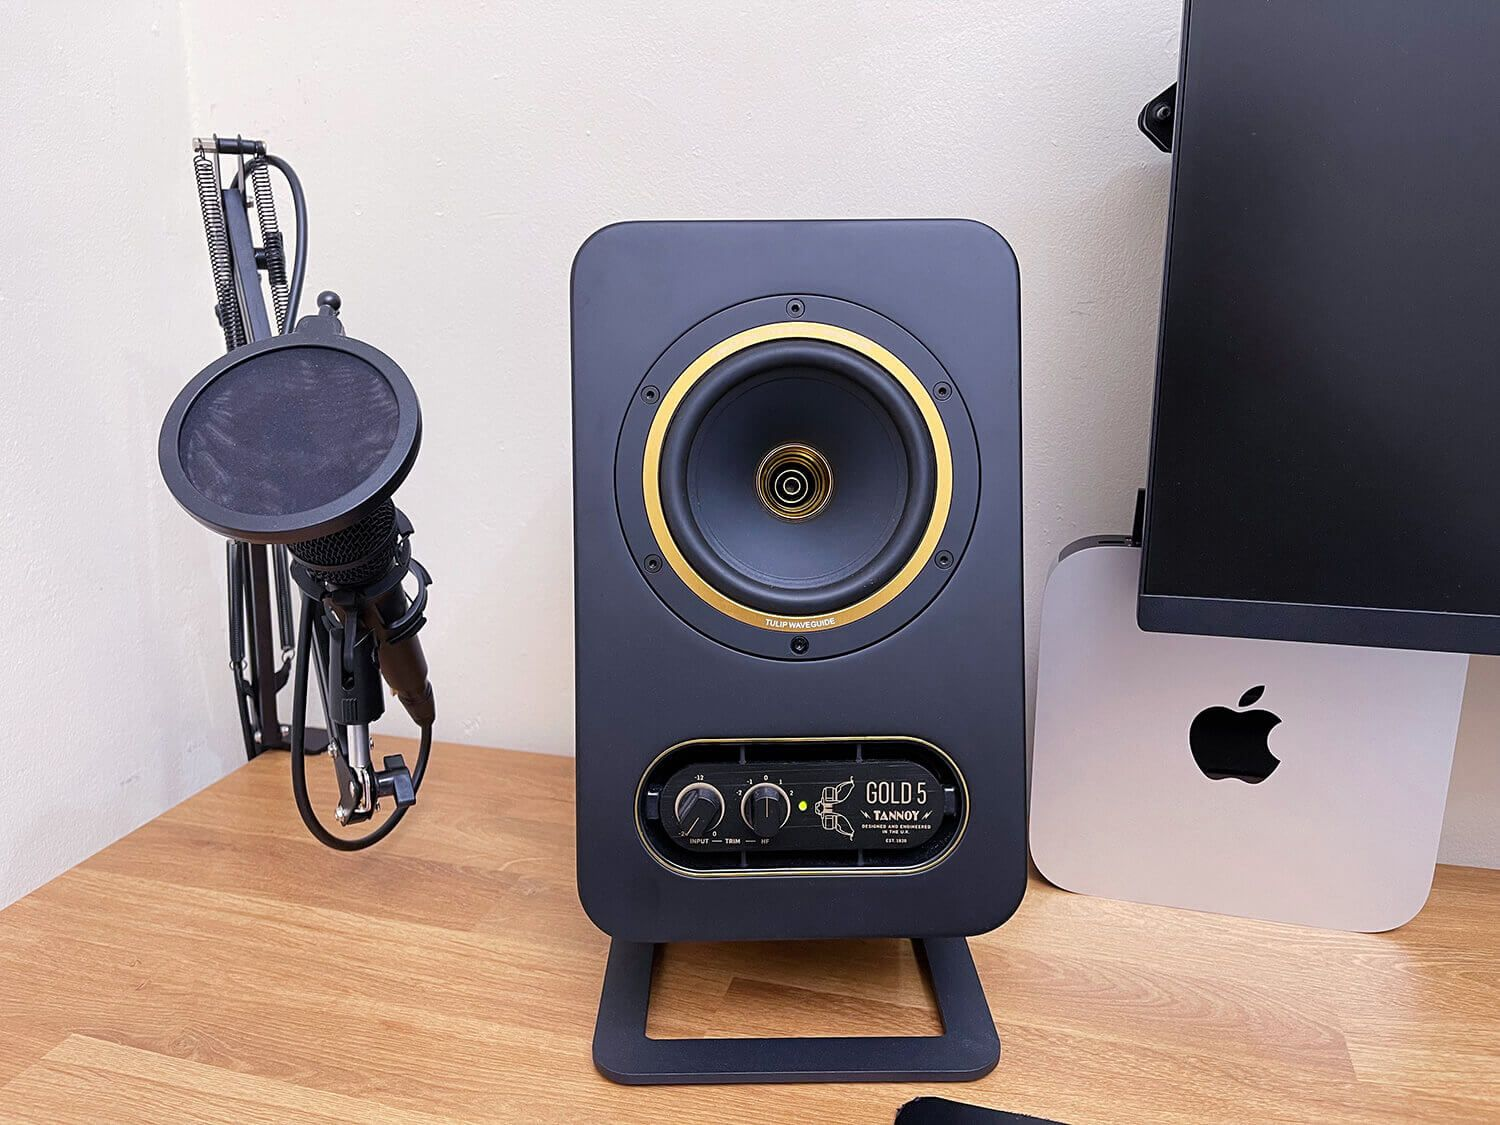 An external microphone and Tannoy Gold 5 studio monitor as part of the Nilson Gaspar’s desk setup